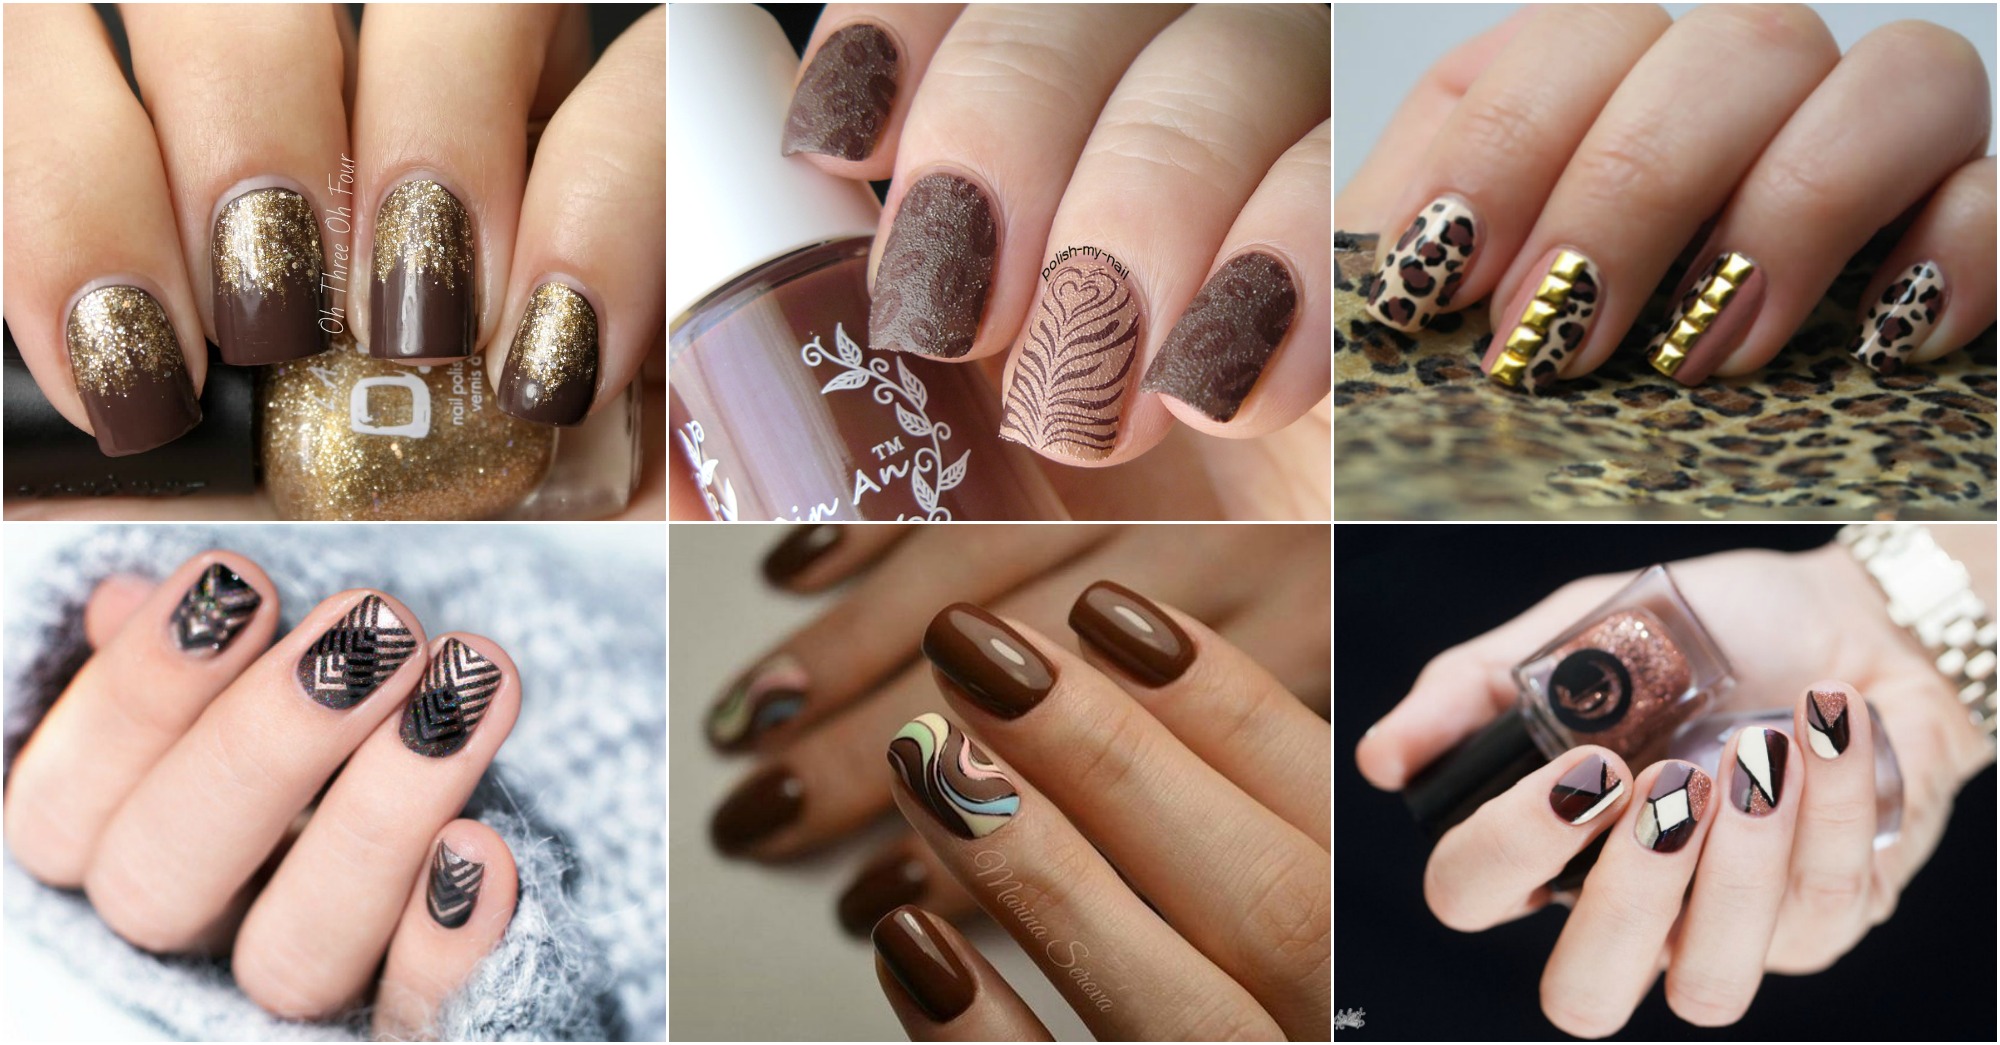 1. "10 Brown Nail Art Ideas for a Chic and Trendy Look" - wide 6